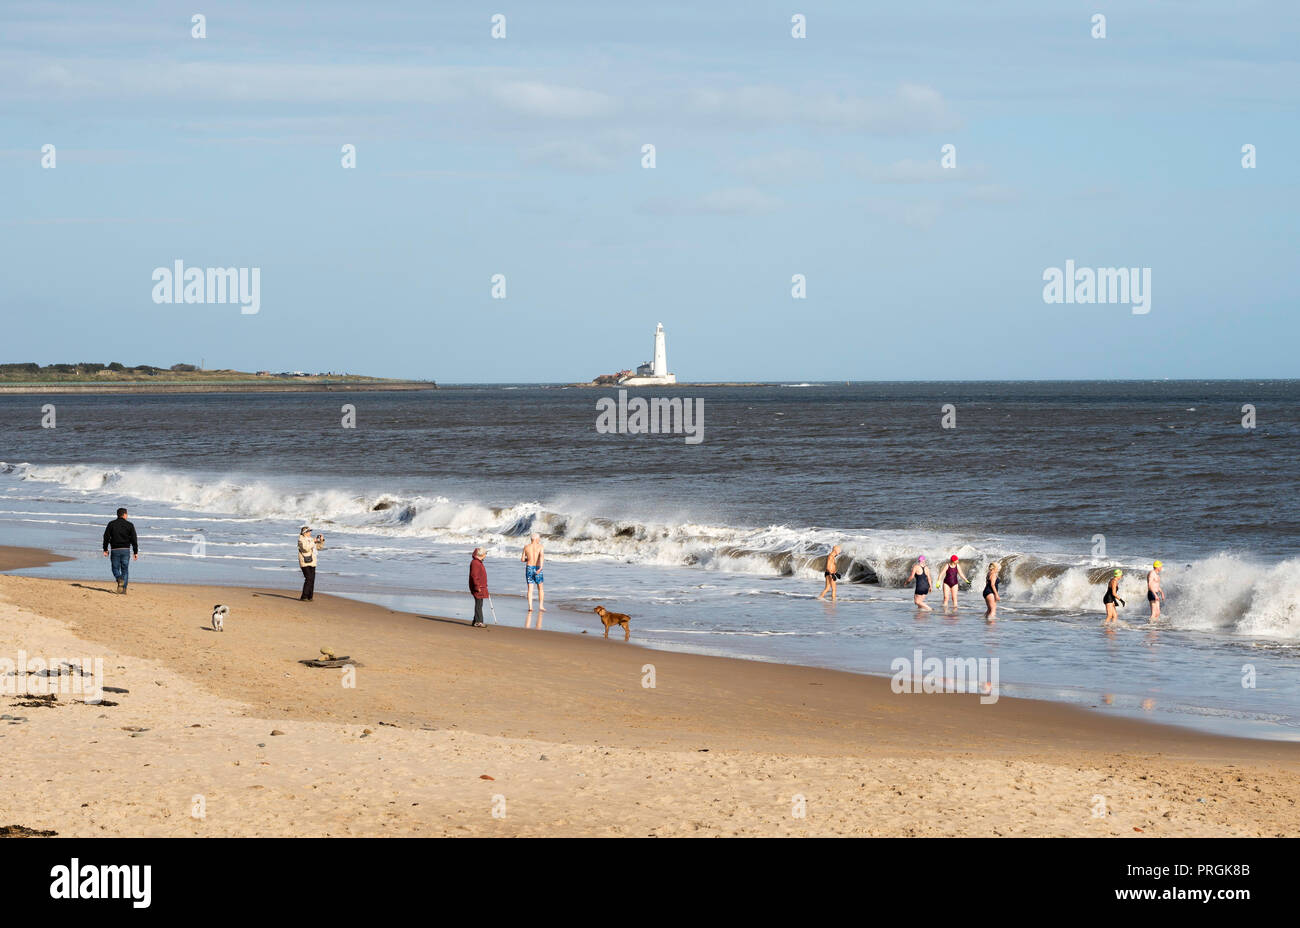 Whitley Bay, UK. 2nd Oct, 2018. Members of the Panama Swimming Club take to the North Sea on a sunny but cold and windy Autumn day. St. Mary's Island in the background. (c) Washington Imaging/Alamy Live News Stock Photo